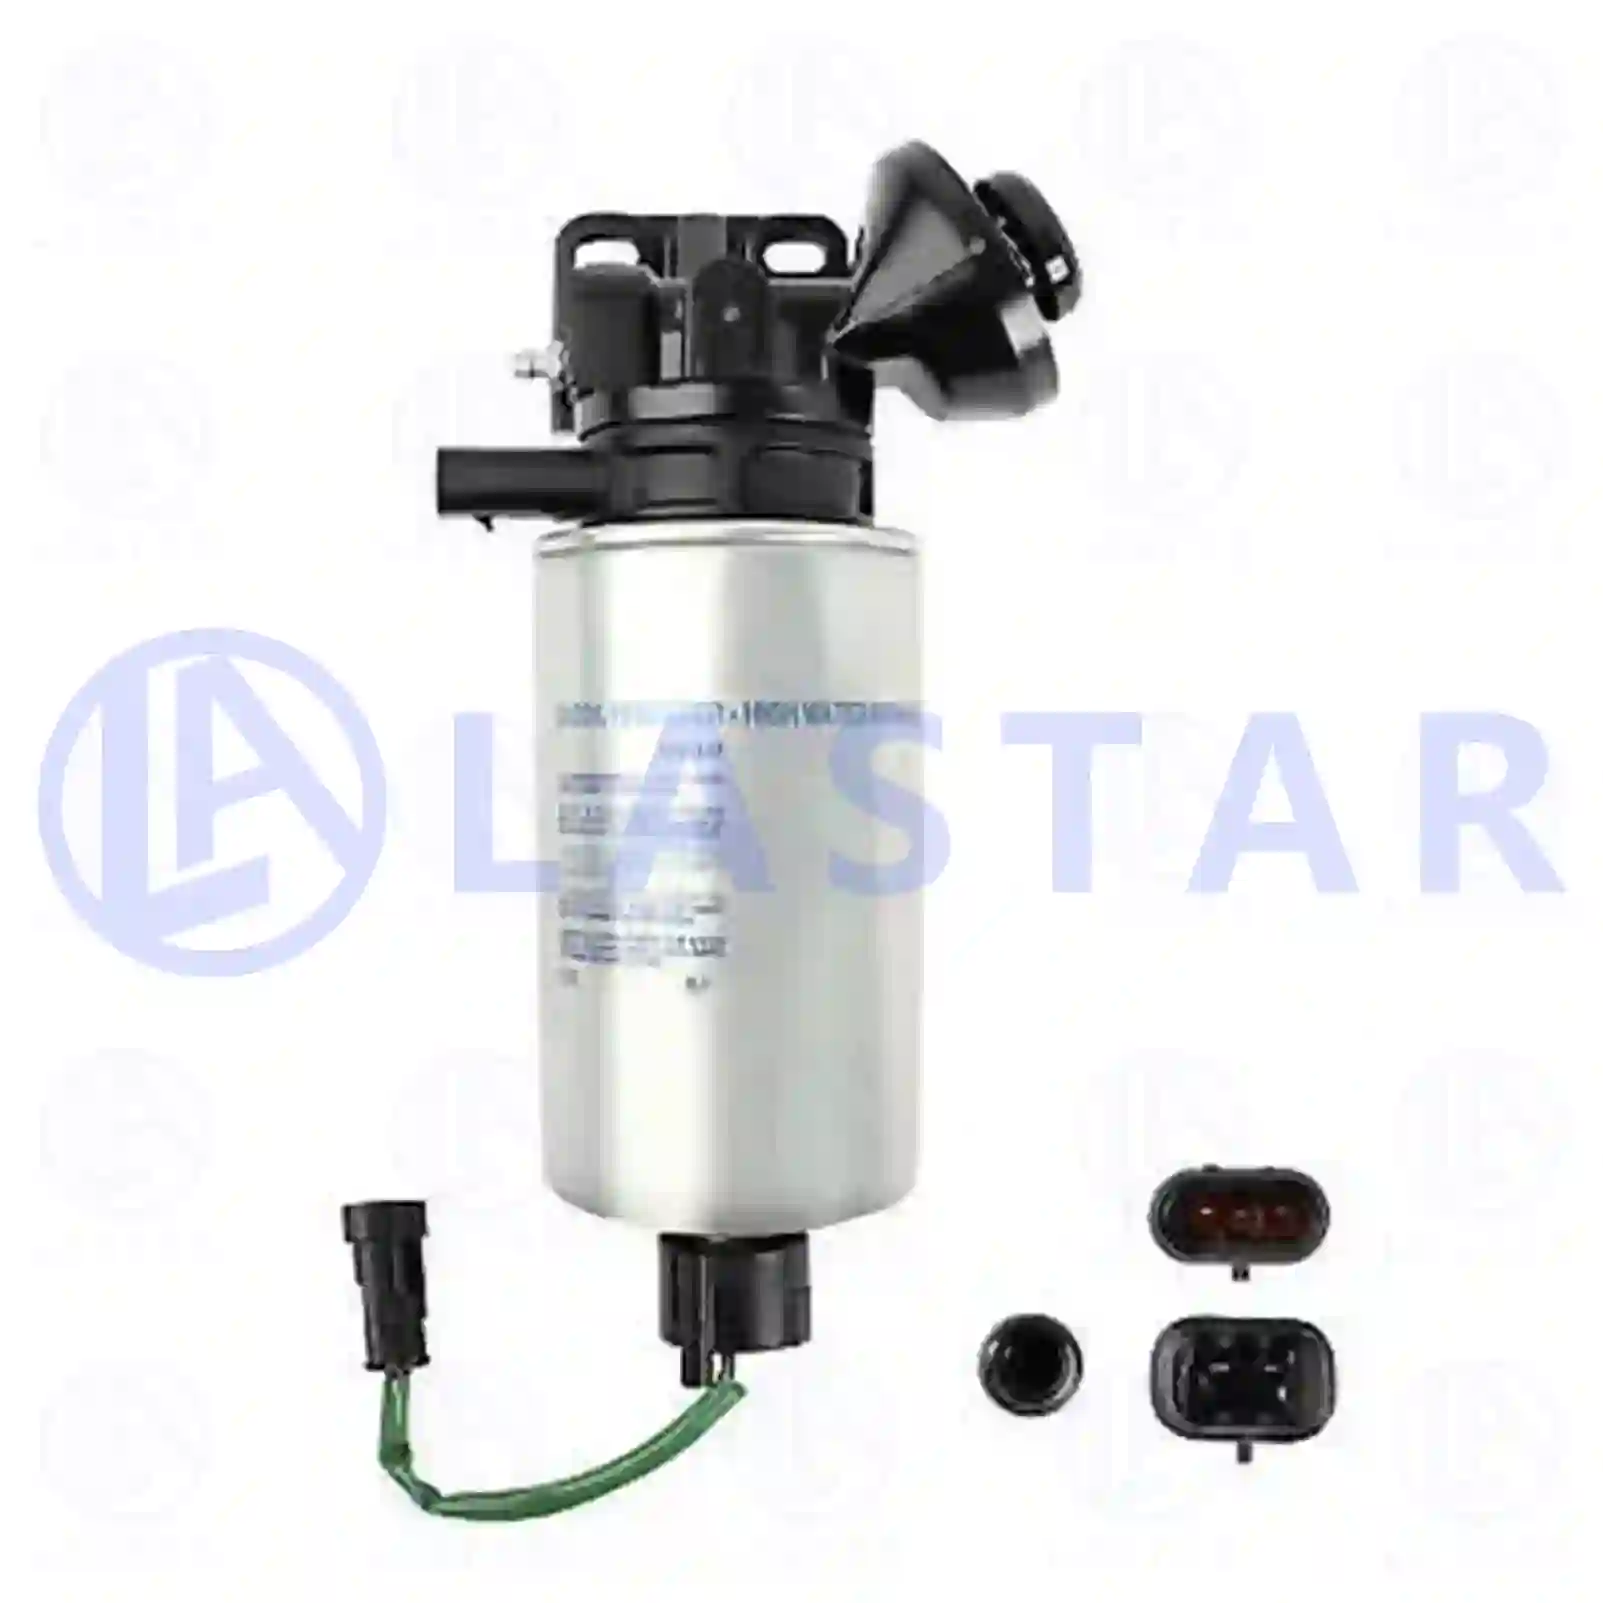 Fuel filter, complete, 77724296, 01908547S, 1908547S ||  77724296 Lastar Spare Part | Truck Spare Parts, Auotomotive Spare Parts Fuel filter, complete, 77724296, 01908547S, 1908547S ||  77724296 Lastar Spare Part | Truck Spare Parts, Auotomotive Spare Parts